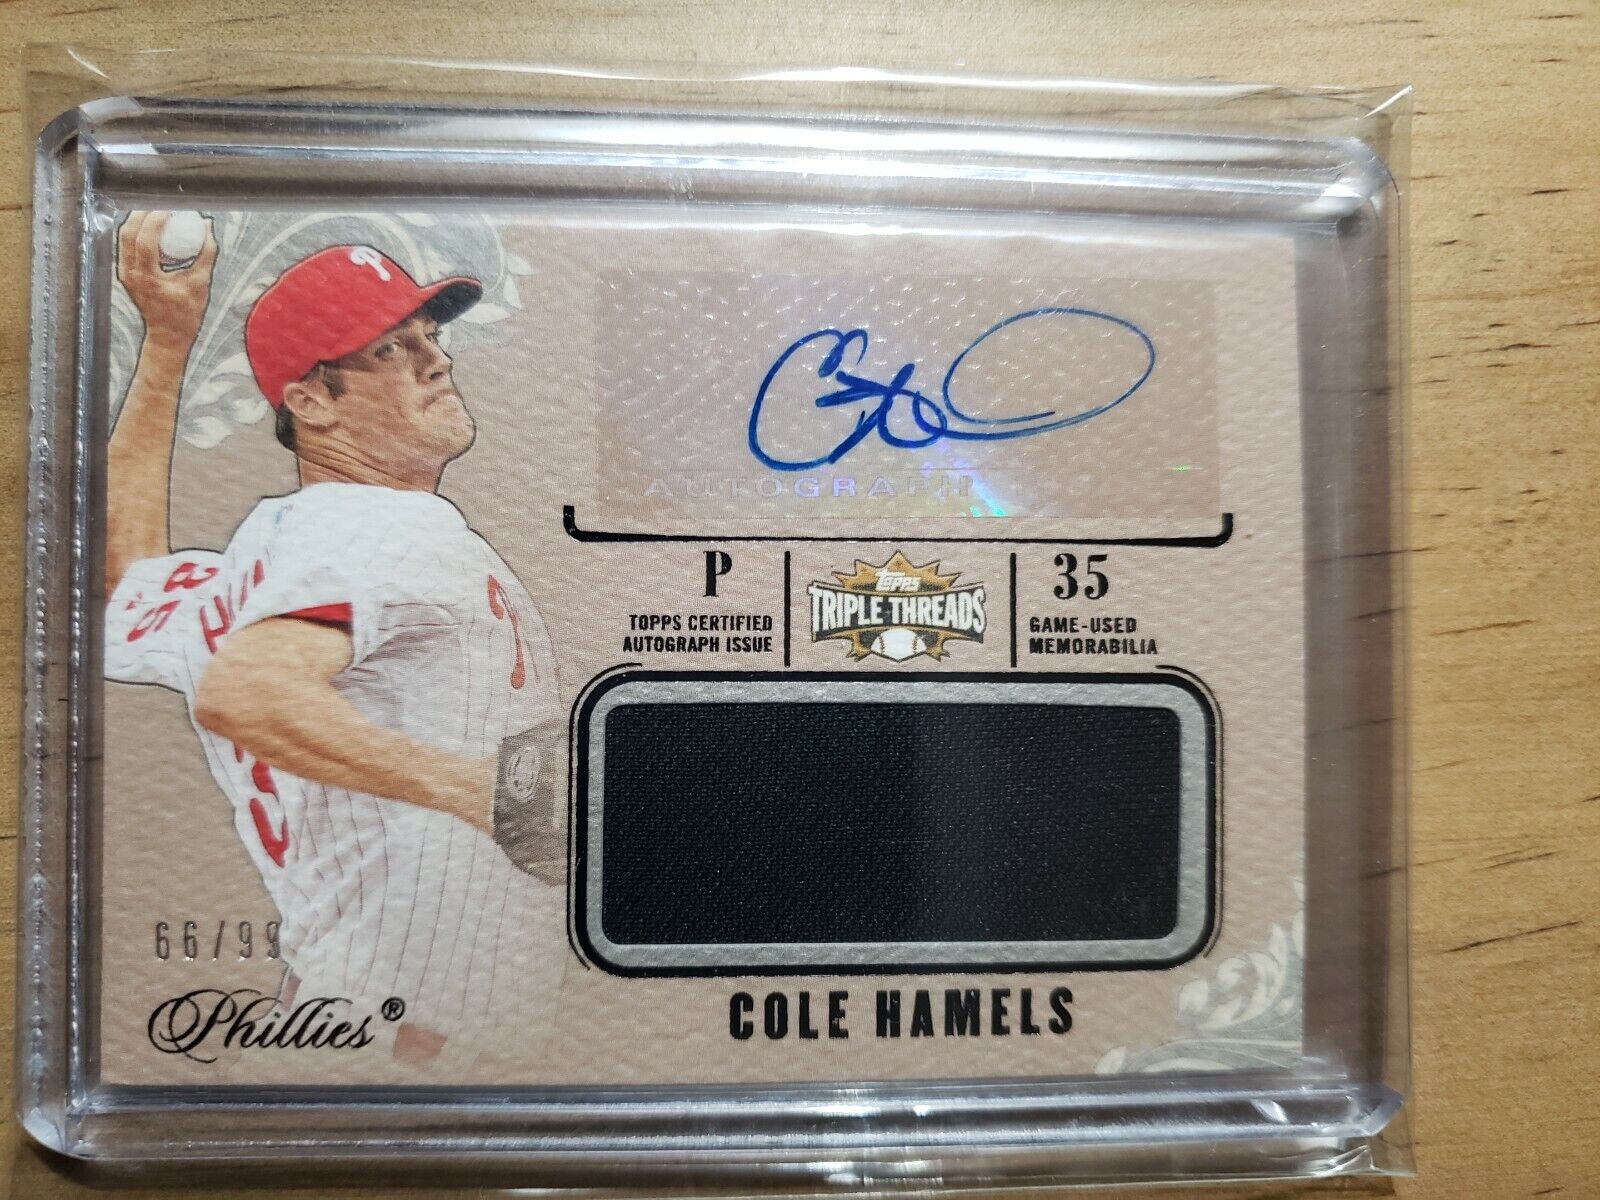 2014 Topps Triple Threads Cole Hamels auto / relic 66/99